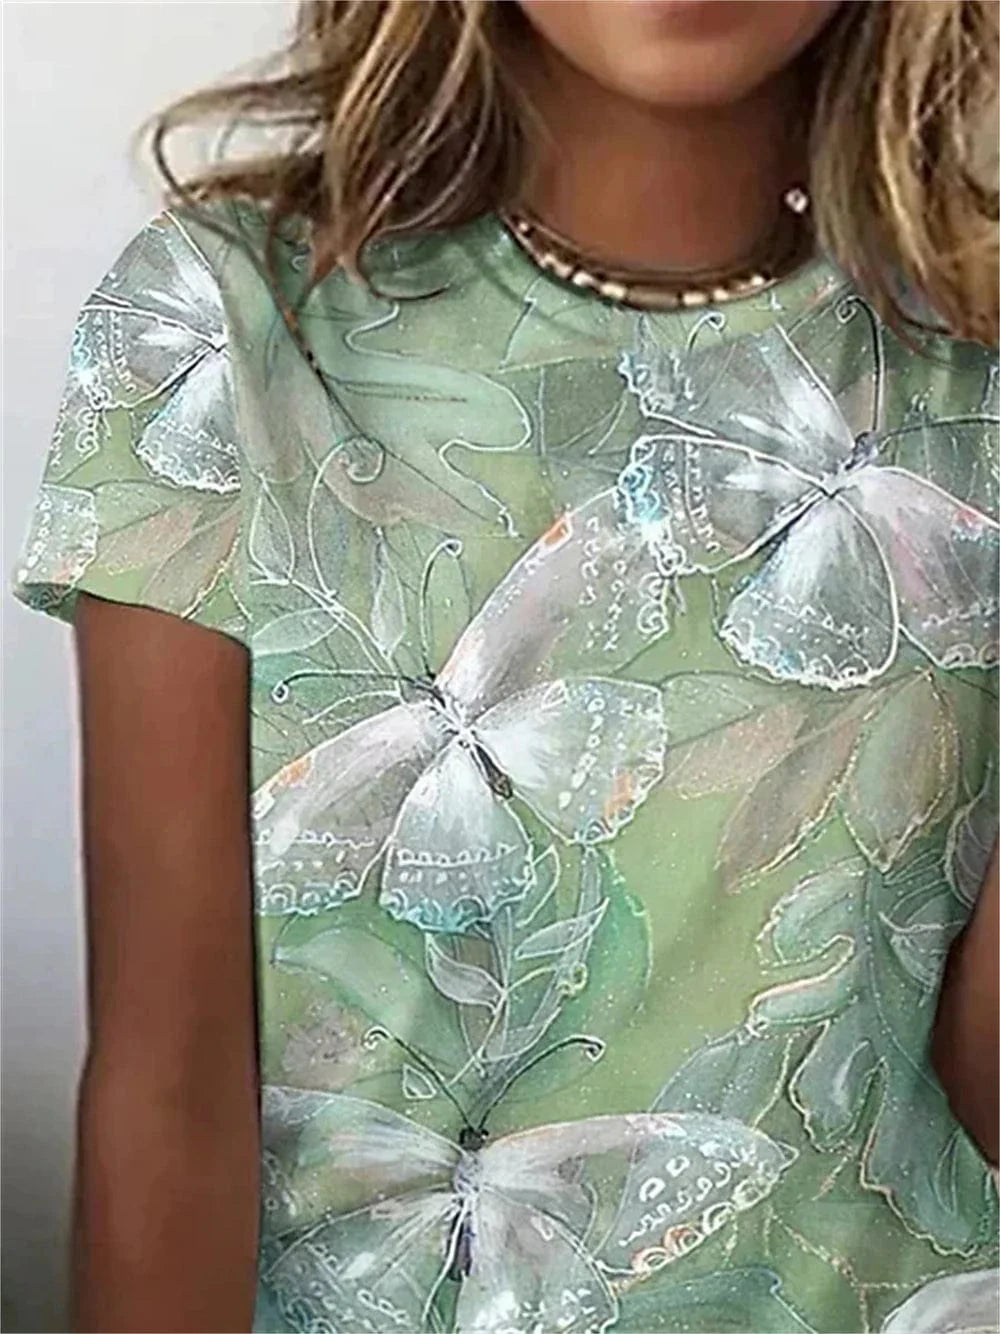 Butterfly Print Women's T-shirt with Short Sleeves and Round Neck